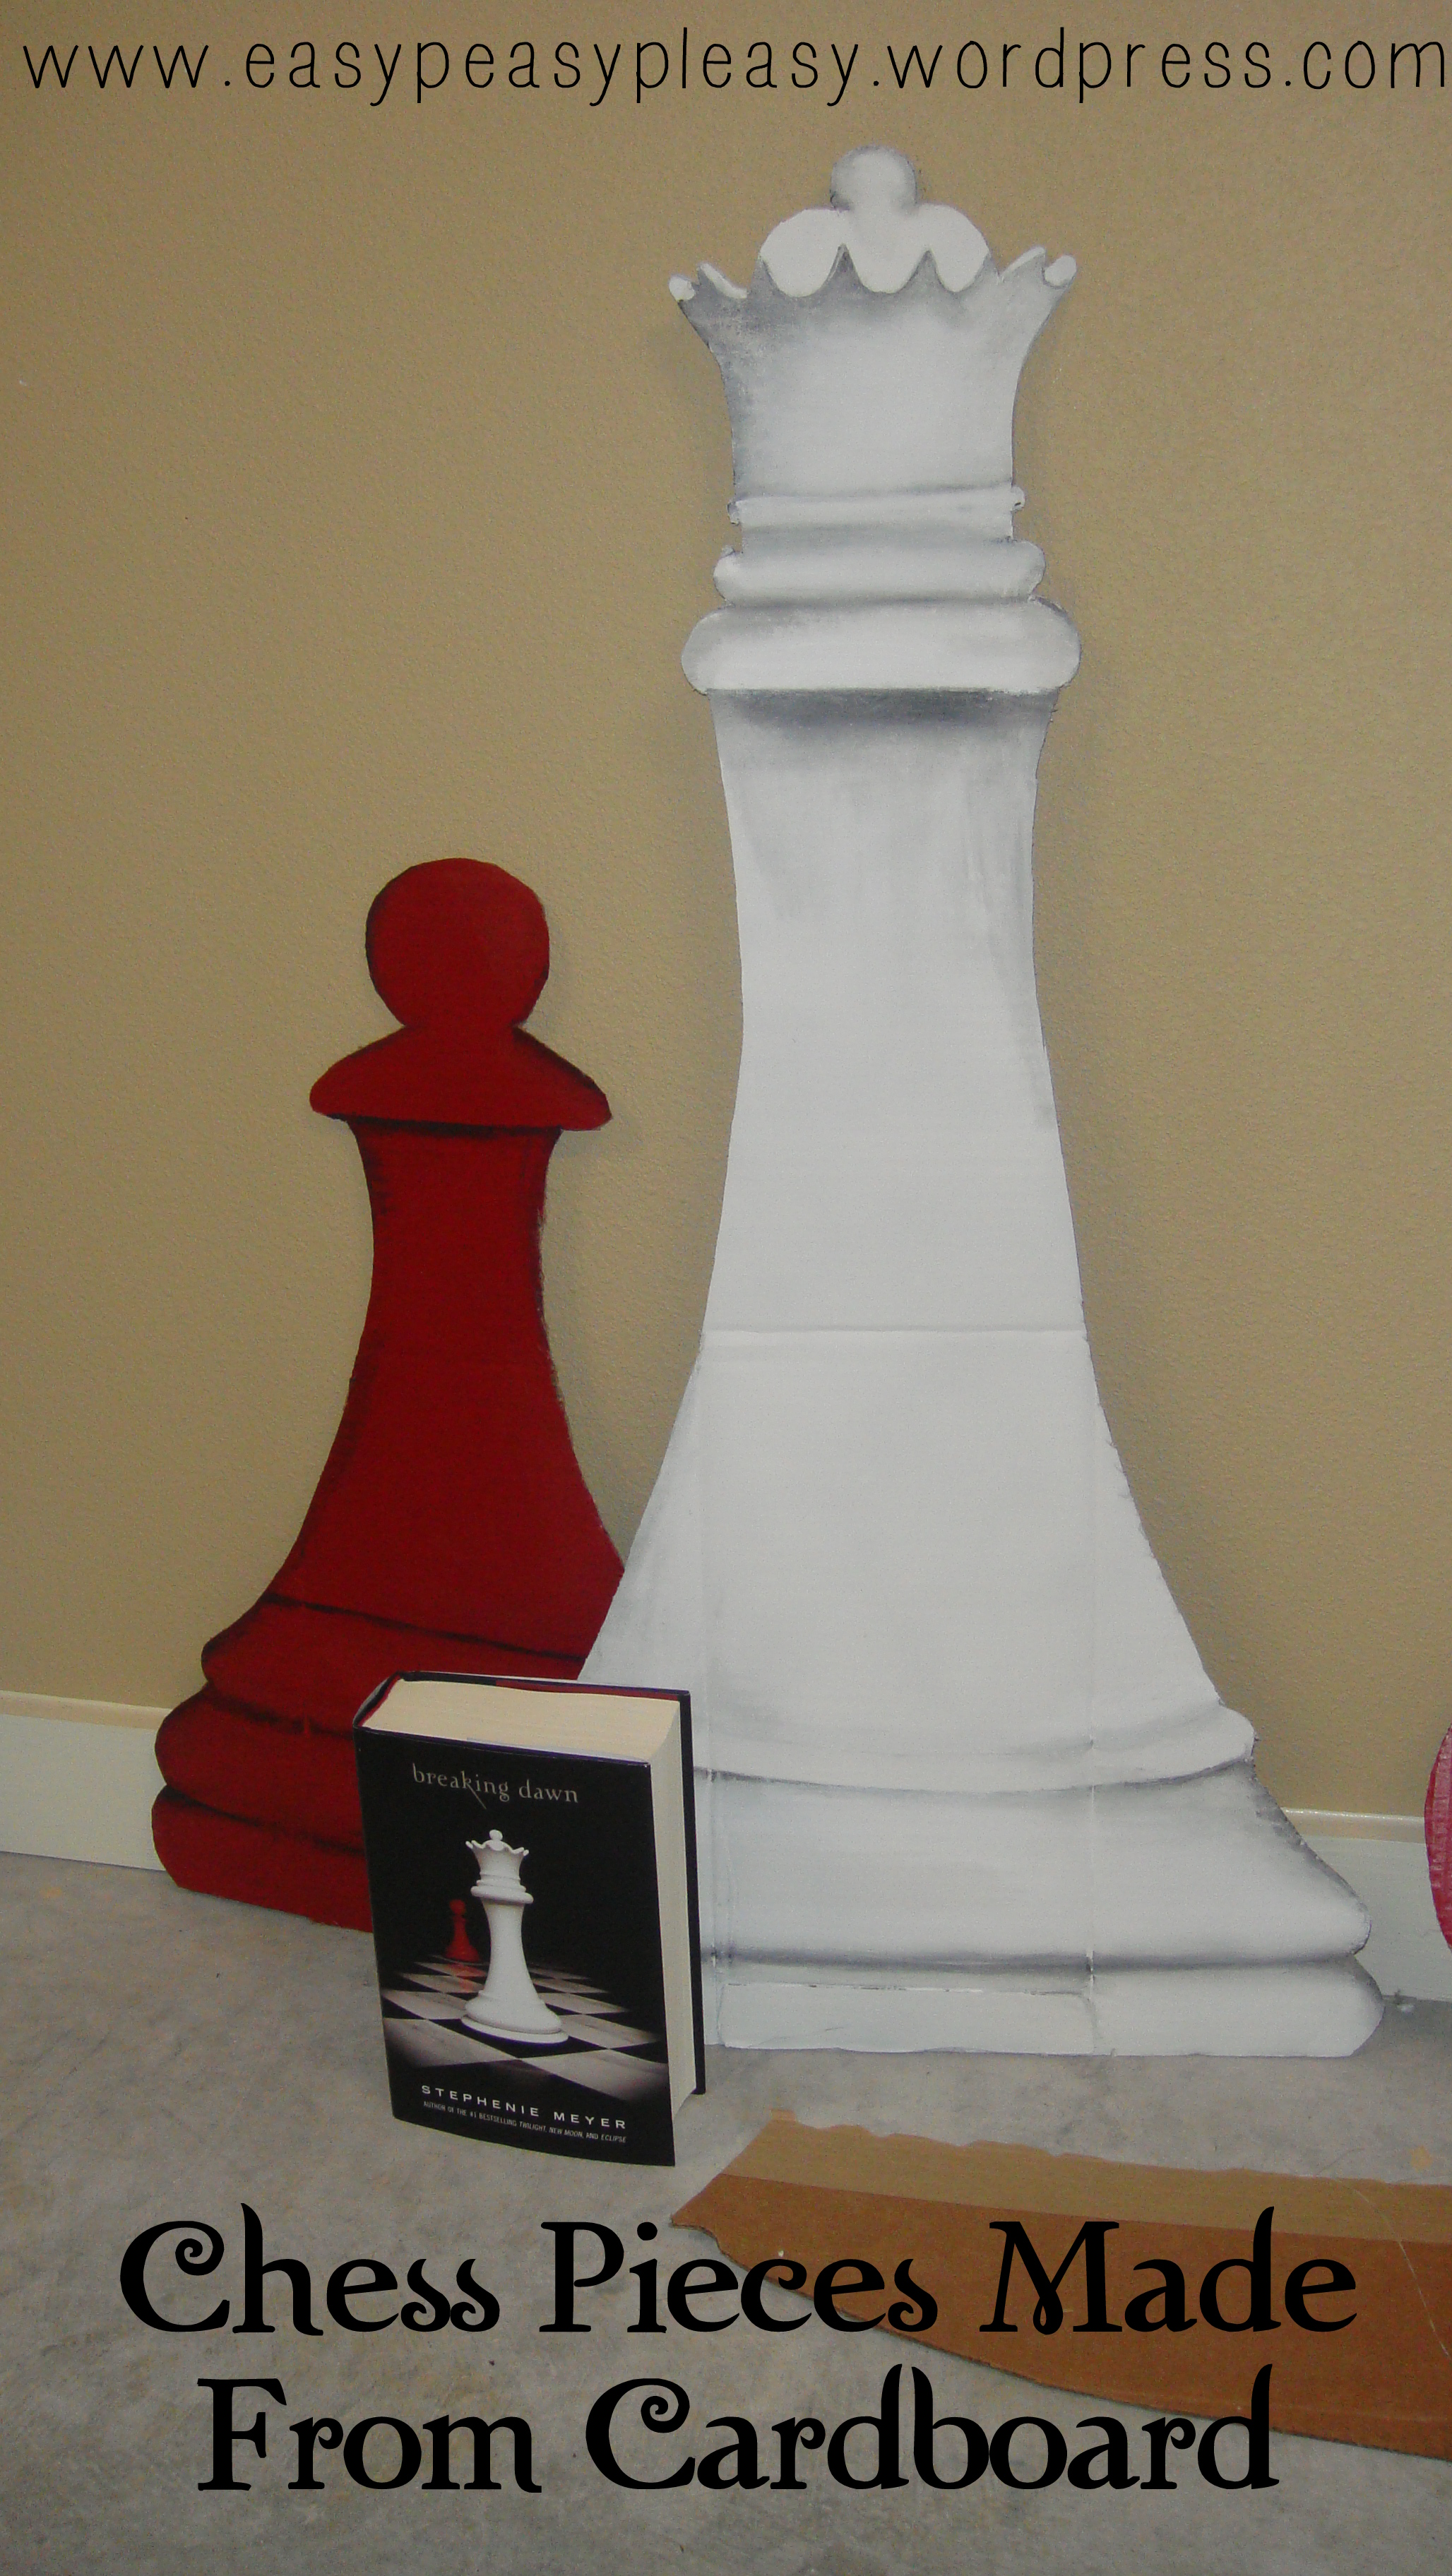 Chess Pieces made from cardboard for Twilight Party